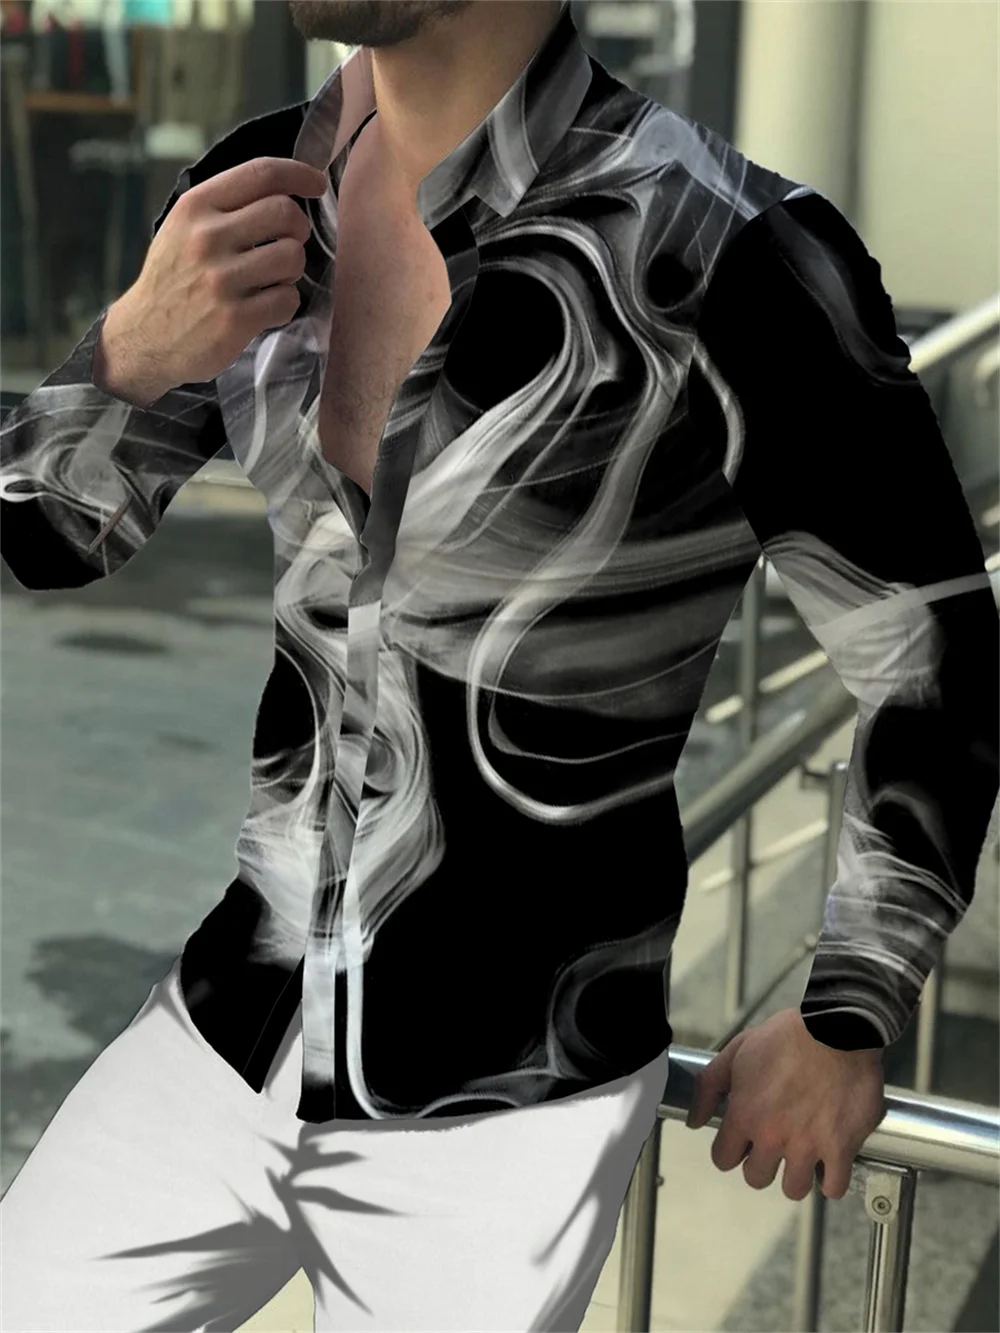 Fashion shirt, men's high-definition printing, soft and comfortable, casual outdoor street curves, stripes, and colorful colors 10 20 rolls 3d pen pla filament 10 meters 20 colors 3d printing pen pla filament 1 75mm high precision diameter filament